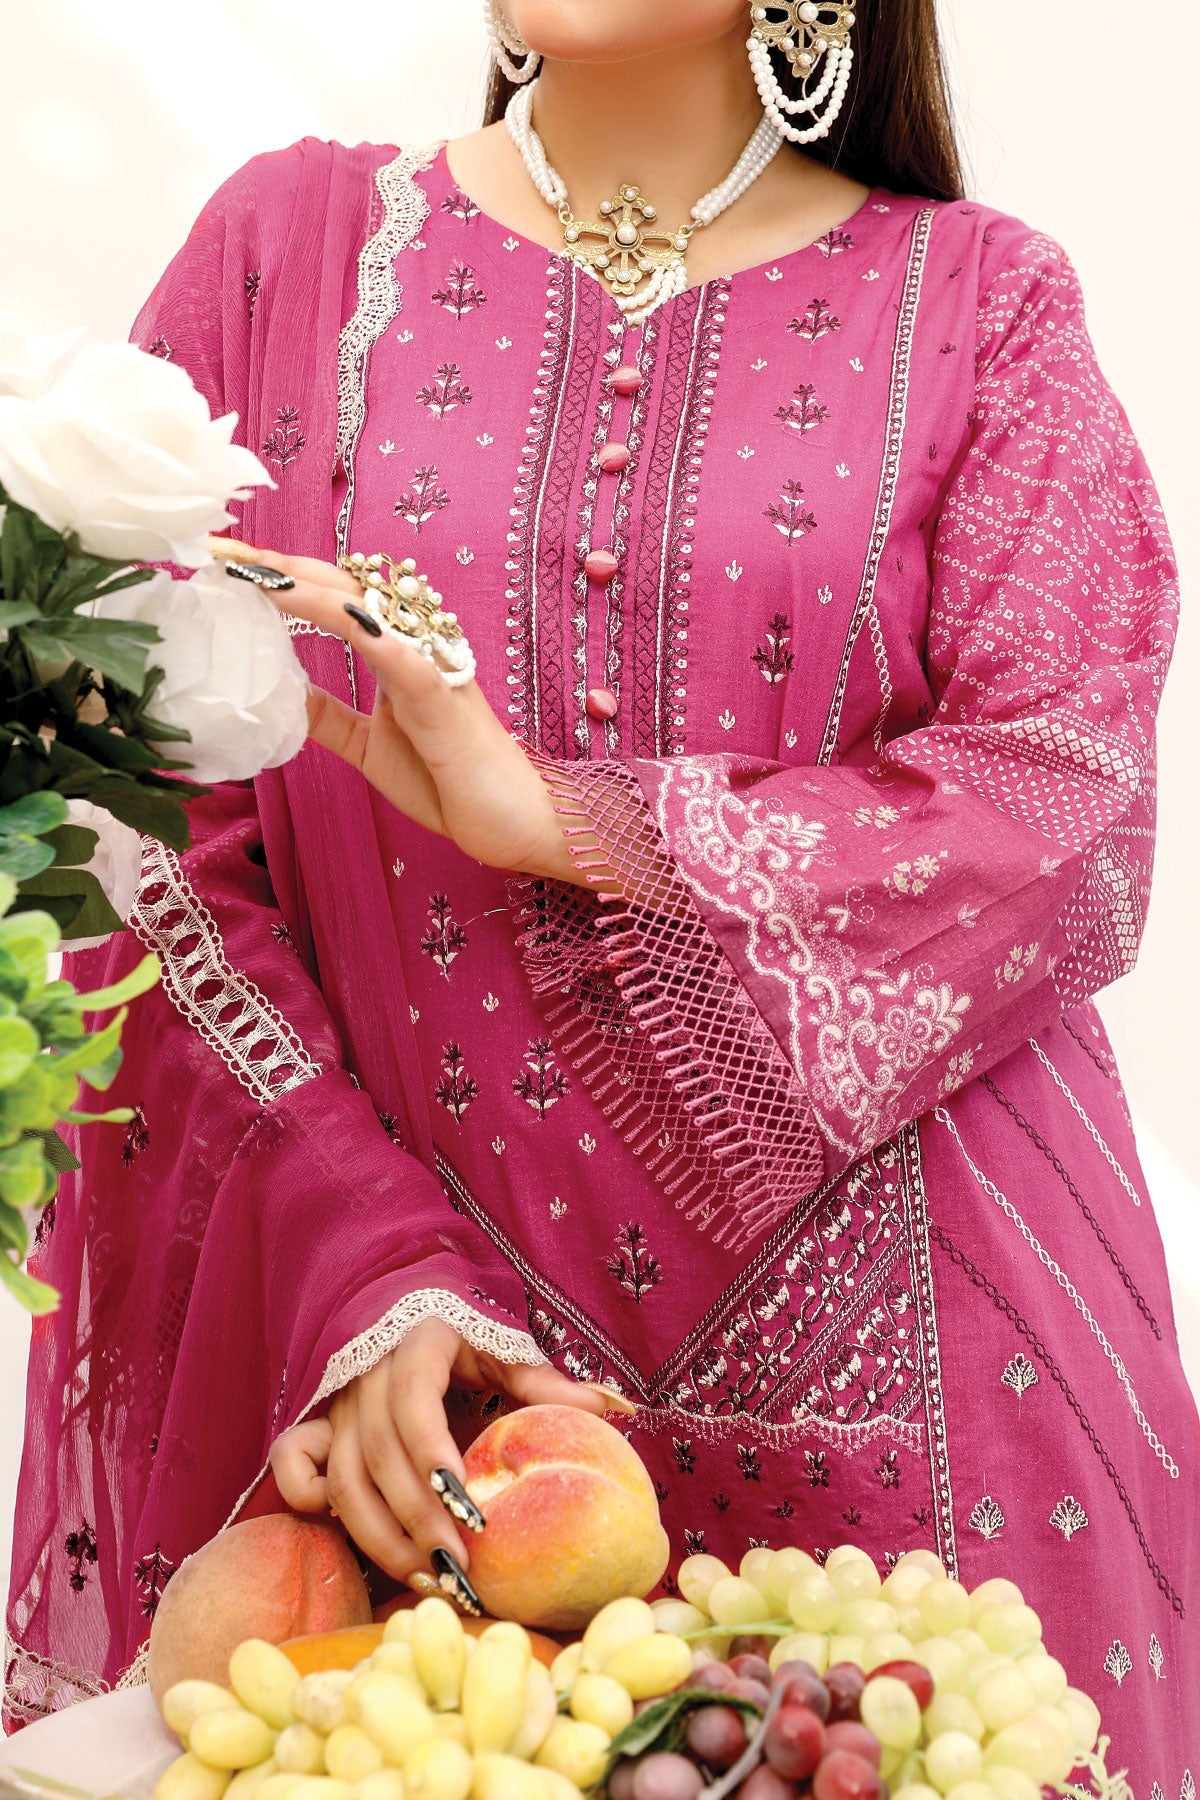 Pretty in Pink - Unstitched 3-Piece Ensemble Suit For Women